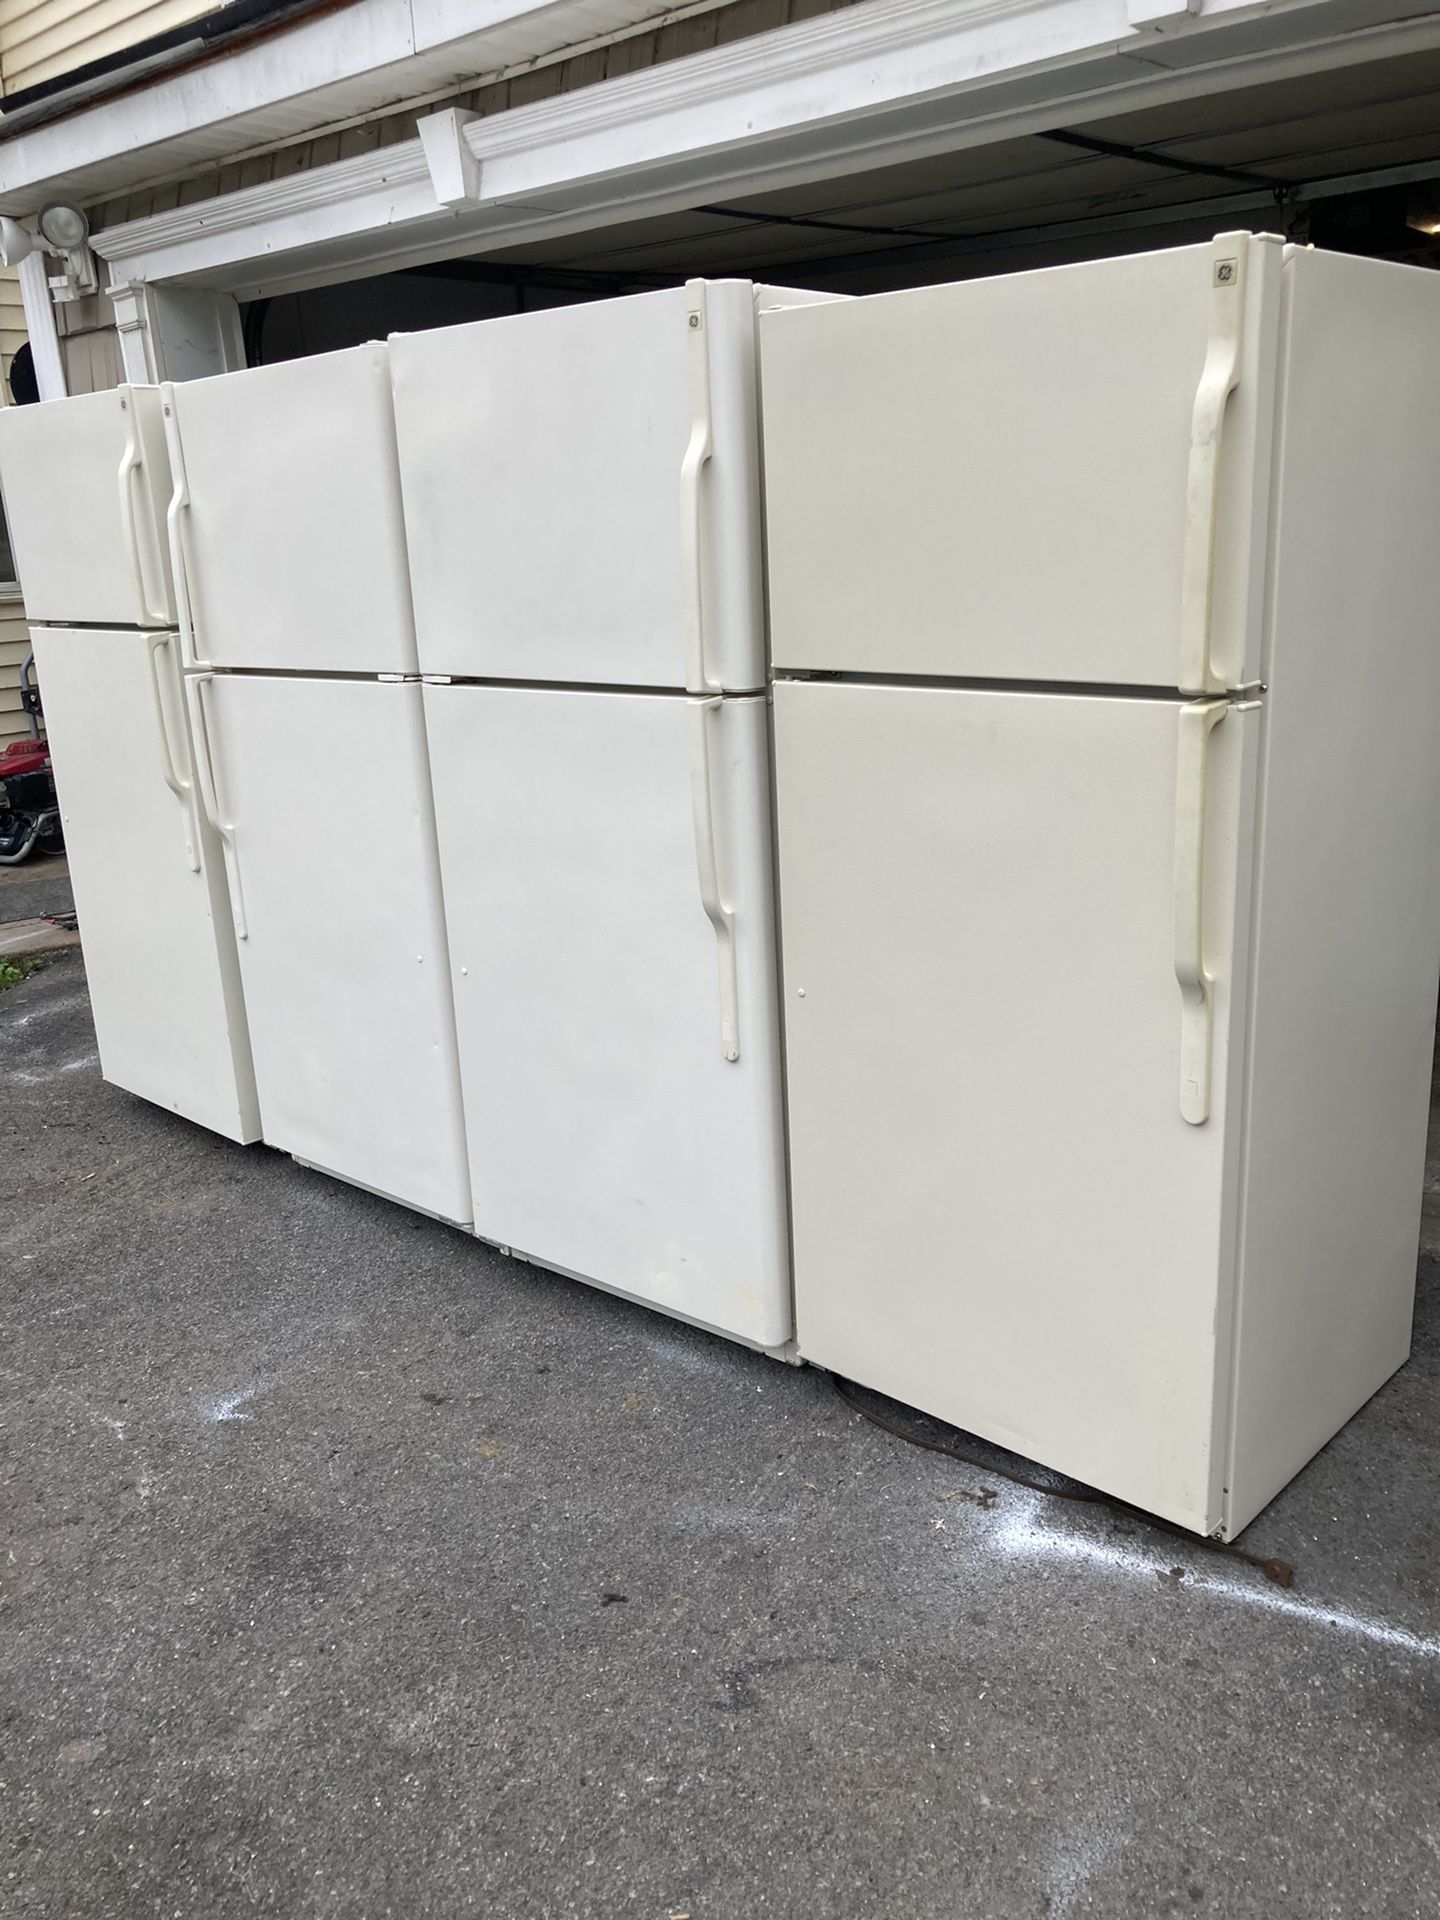 Many Refrigerators Look& Work Excellent 90 Day Guarantee 